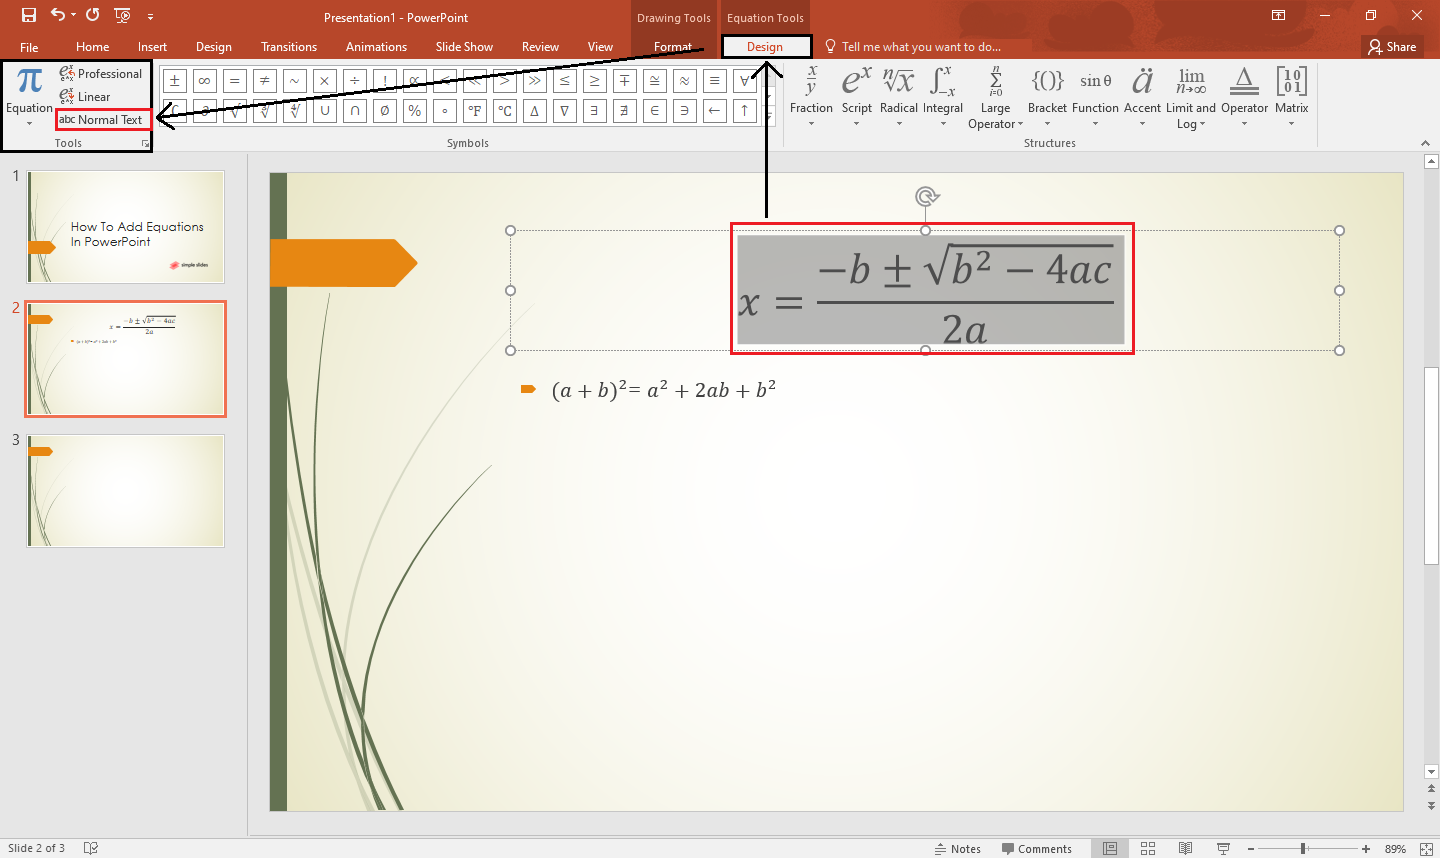 Select "Design under the "Equation tools then look and click "normal text" option.